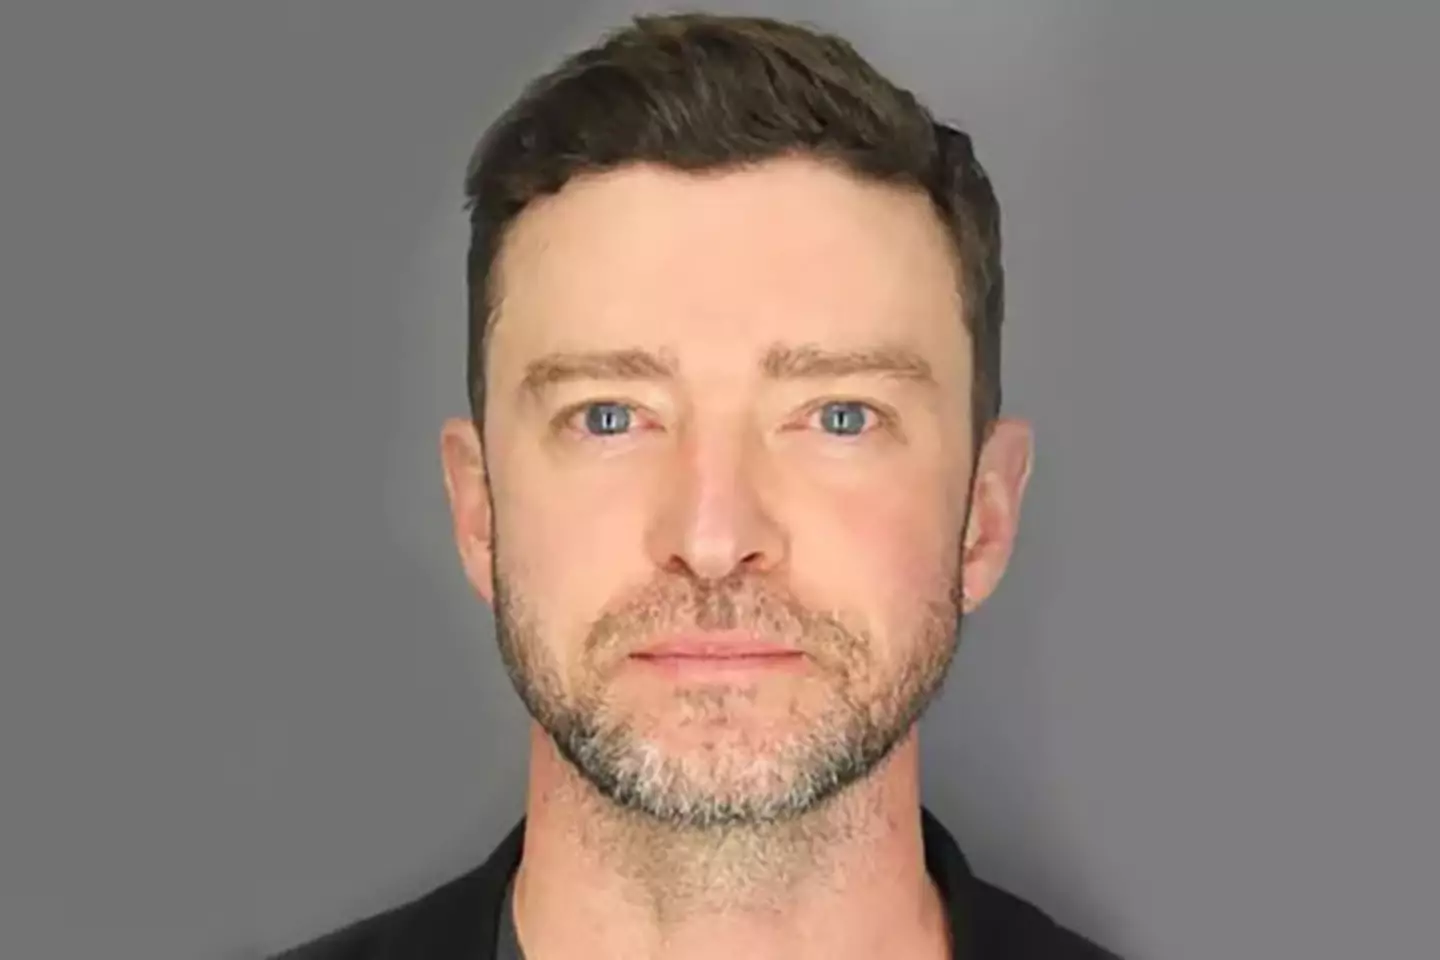 Justin Timberlake was arrested last month (17 June) on 'DWI-related charges'. (Sag Harbor Police Department)